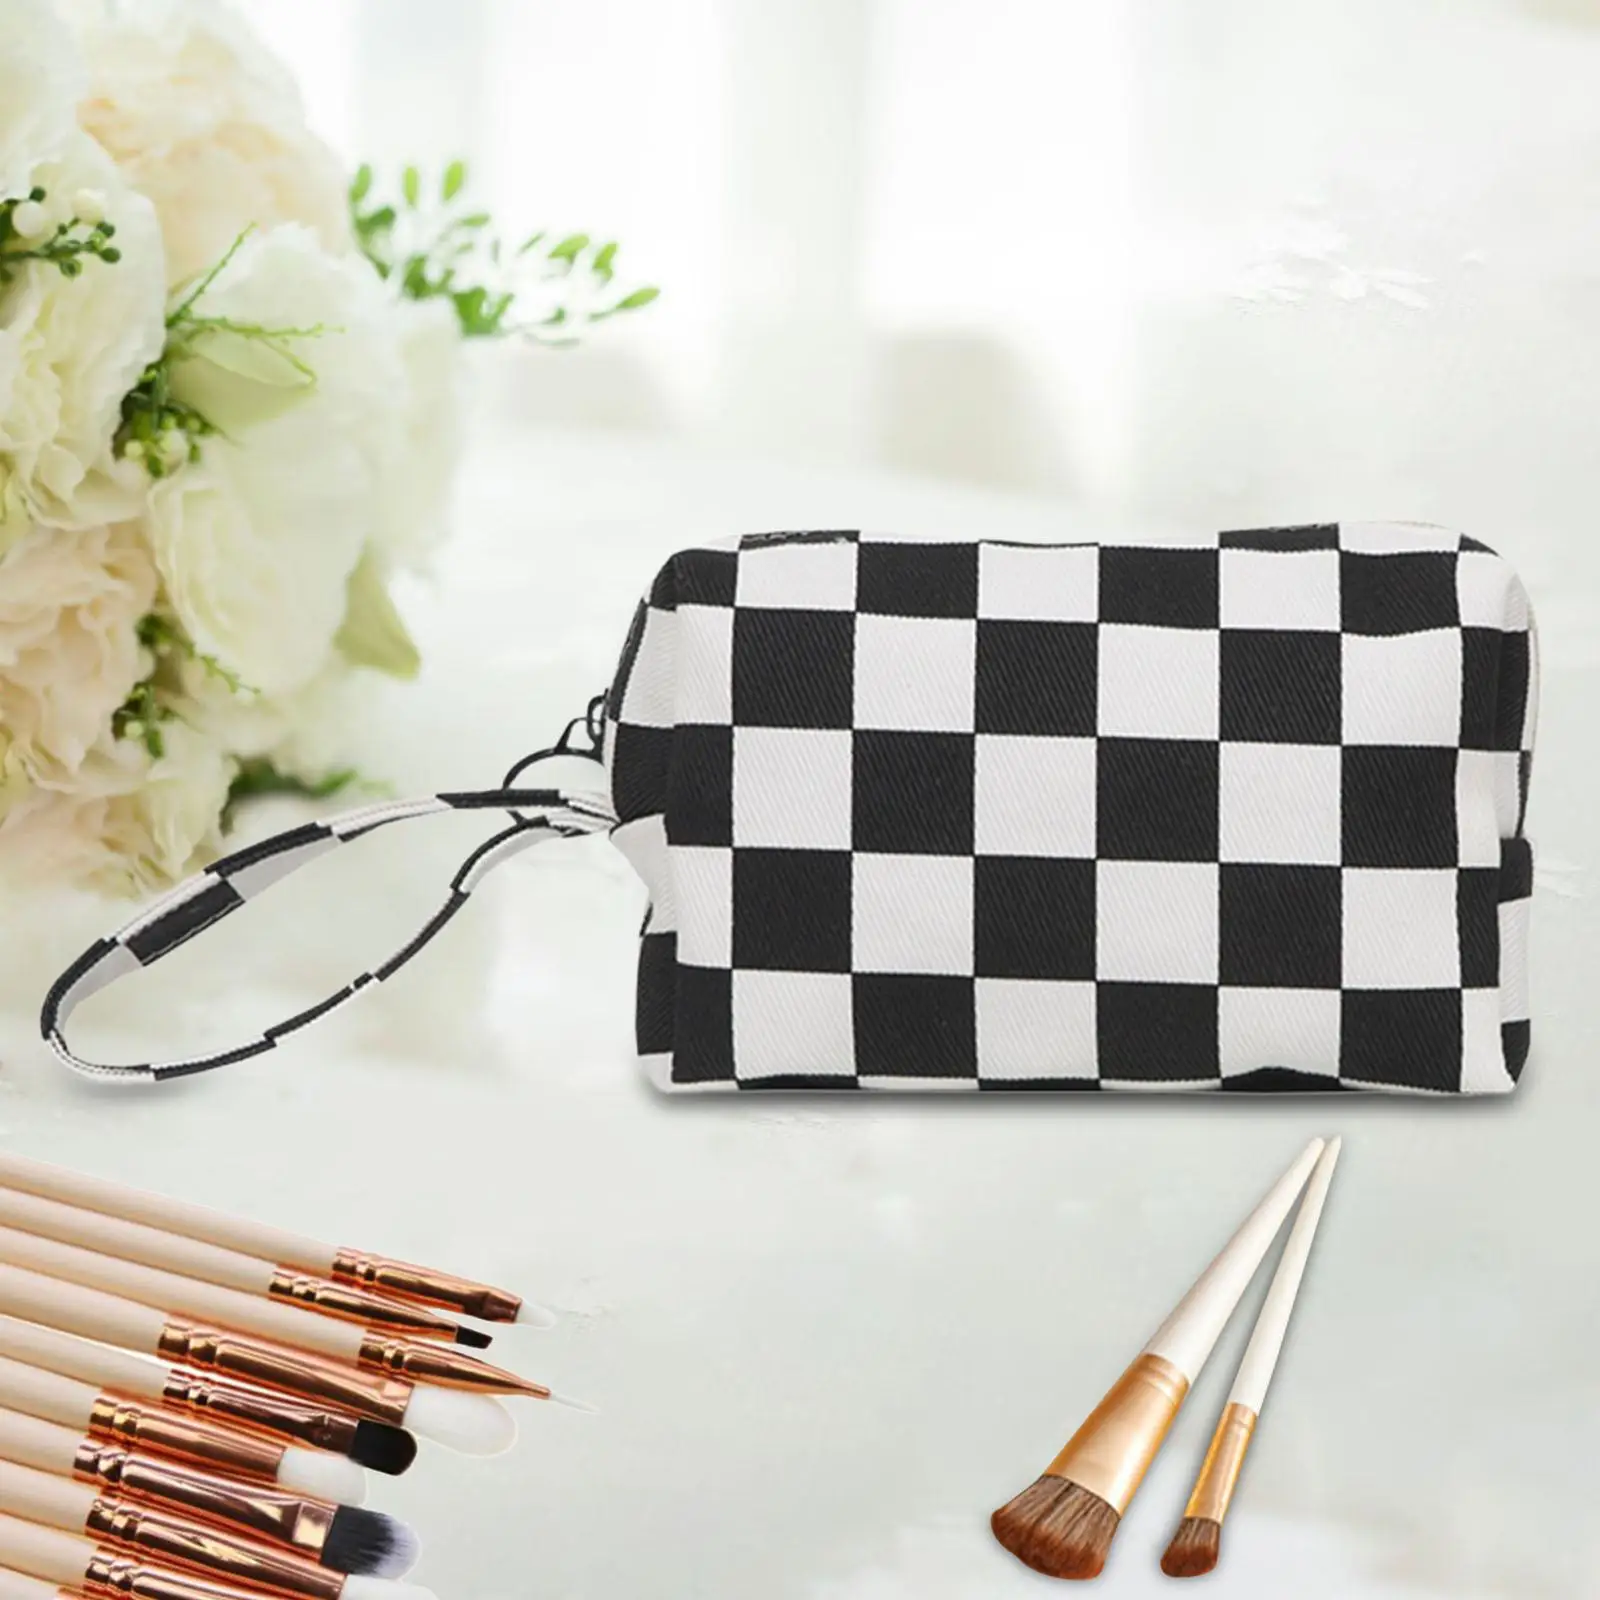 Makeup Bag Zipper Design with Handle Strap for Women and Girls Storage Case